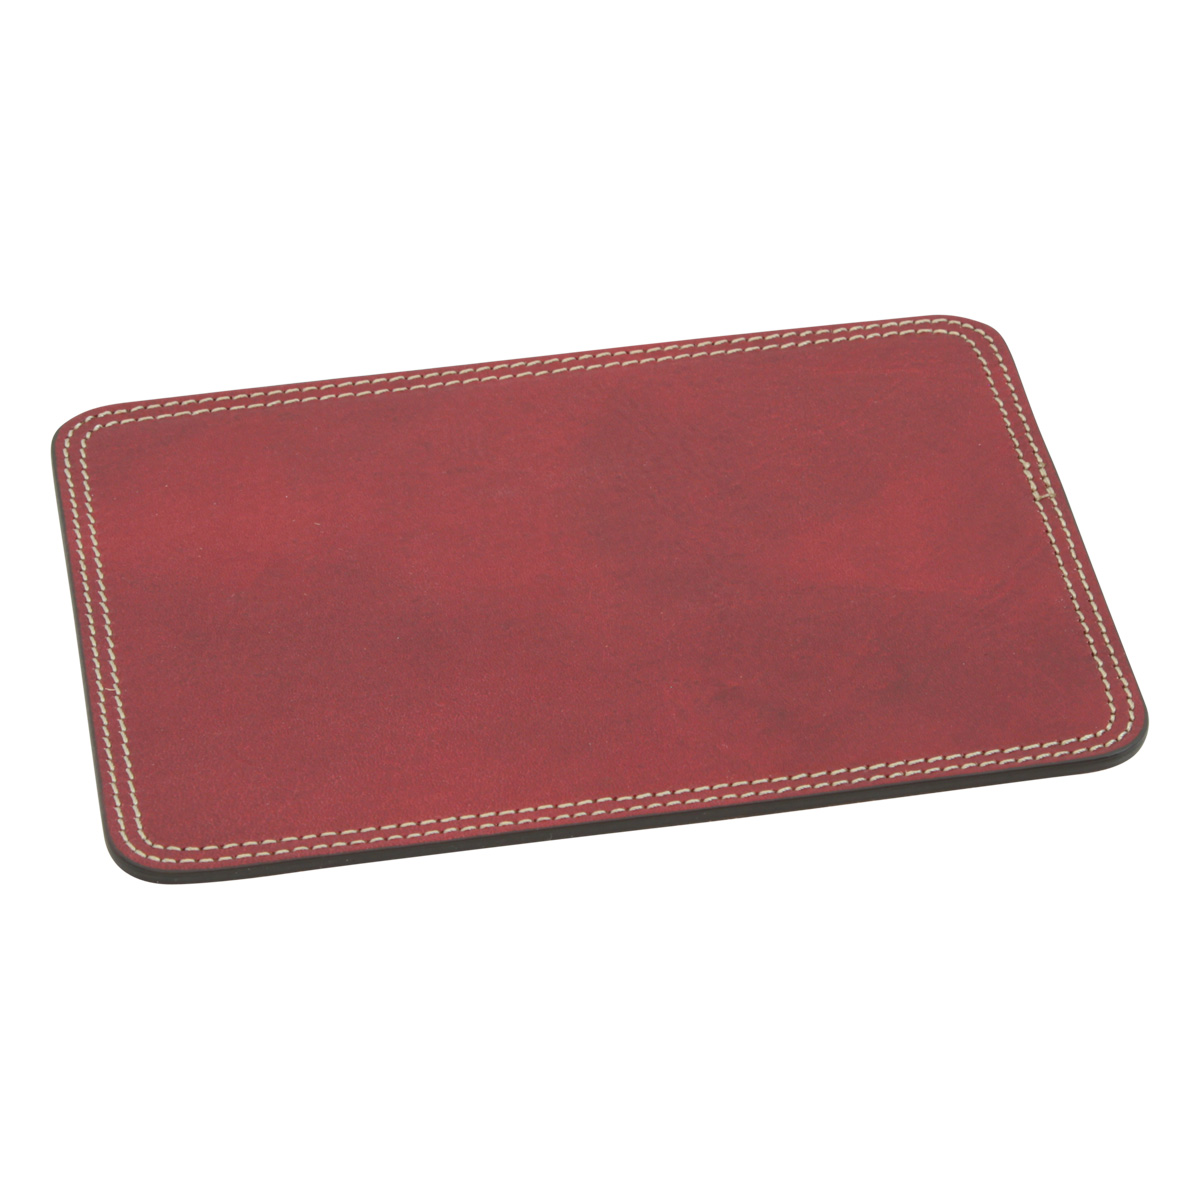 Leather mouse pad - red | 761089RO UK | Old Angler Firenze